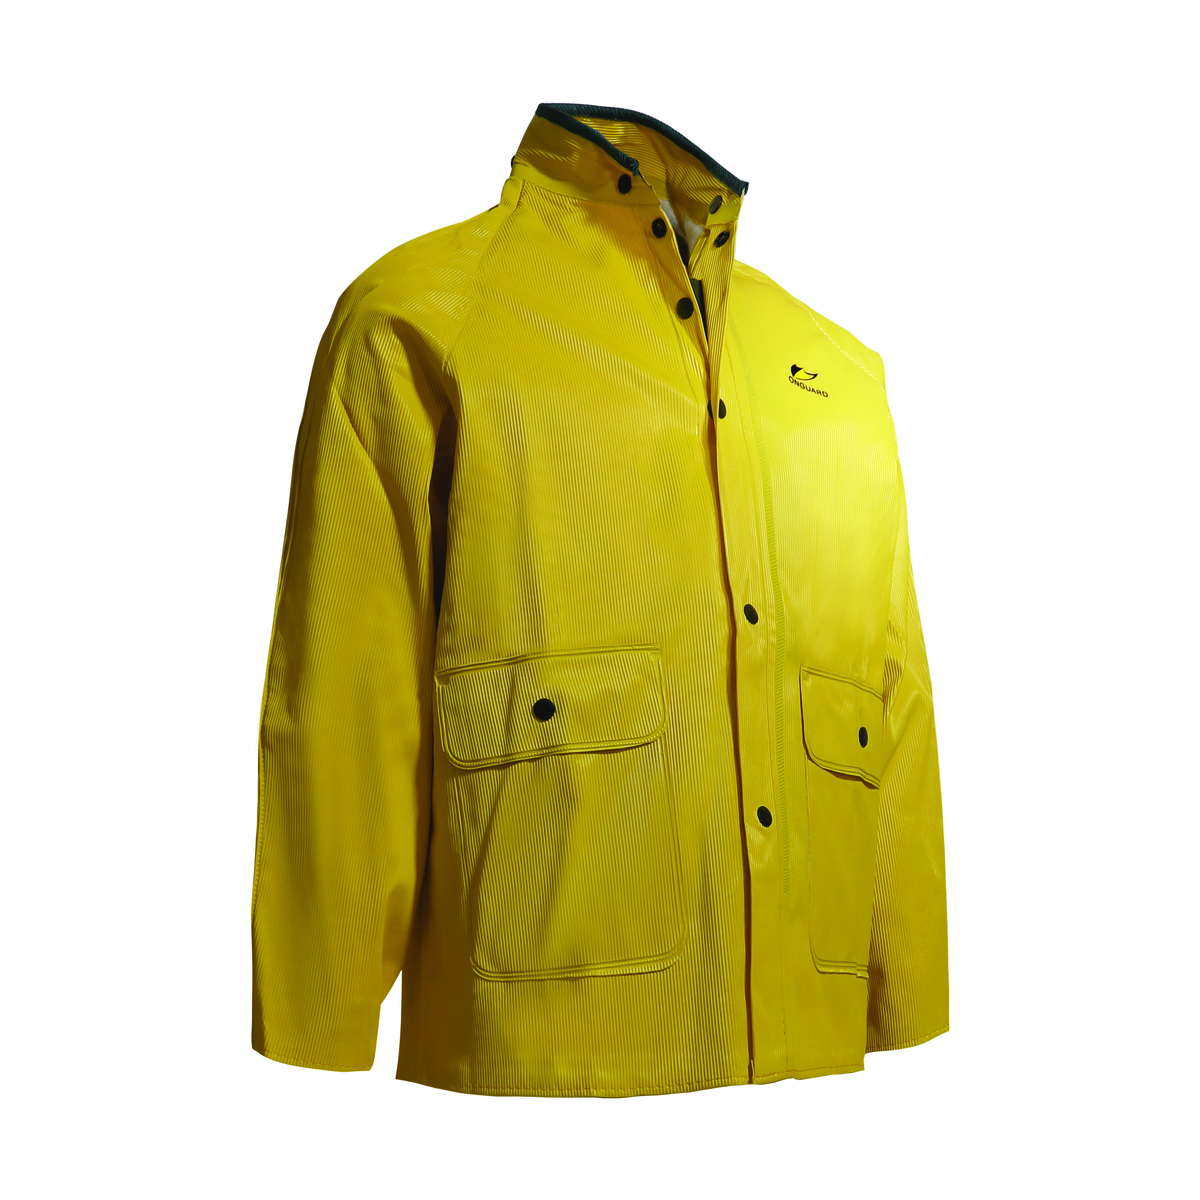 Dunlop® Protective Footwear Large Yellow Webtex .65 mm Polyester/PVC Rain Jacket With Hood Snaps